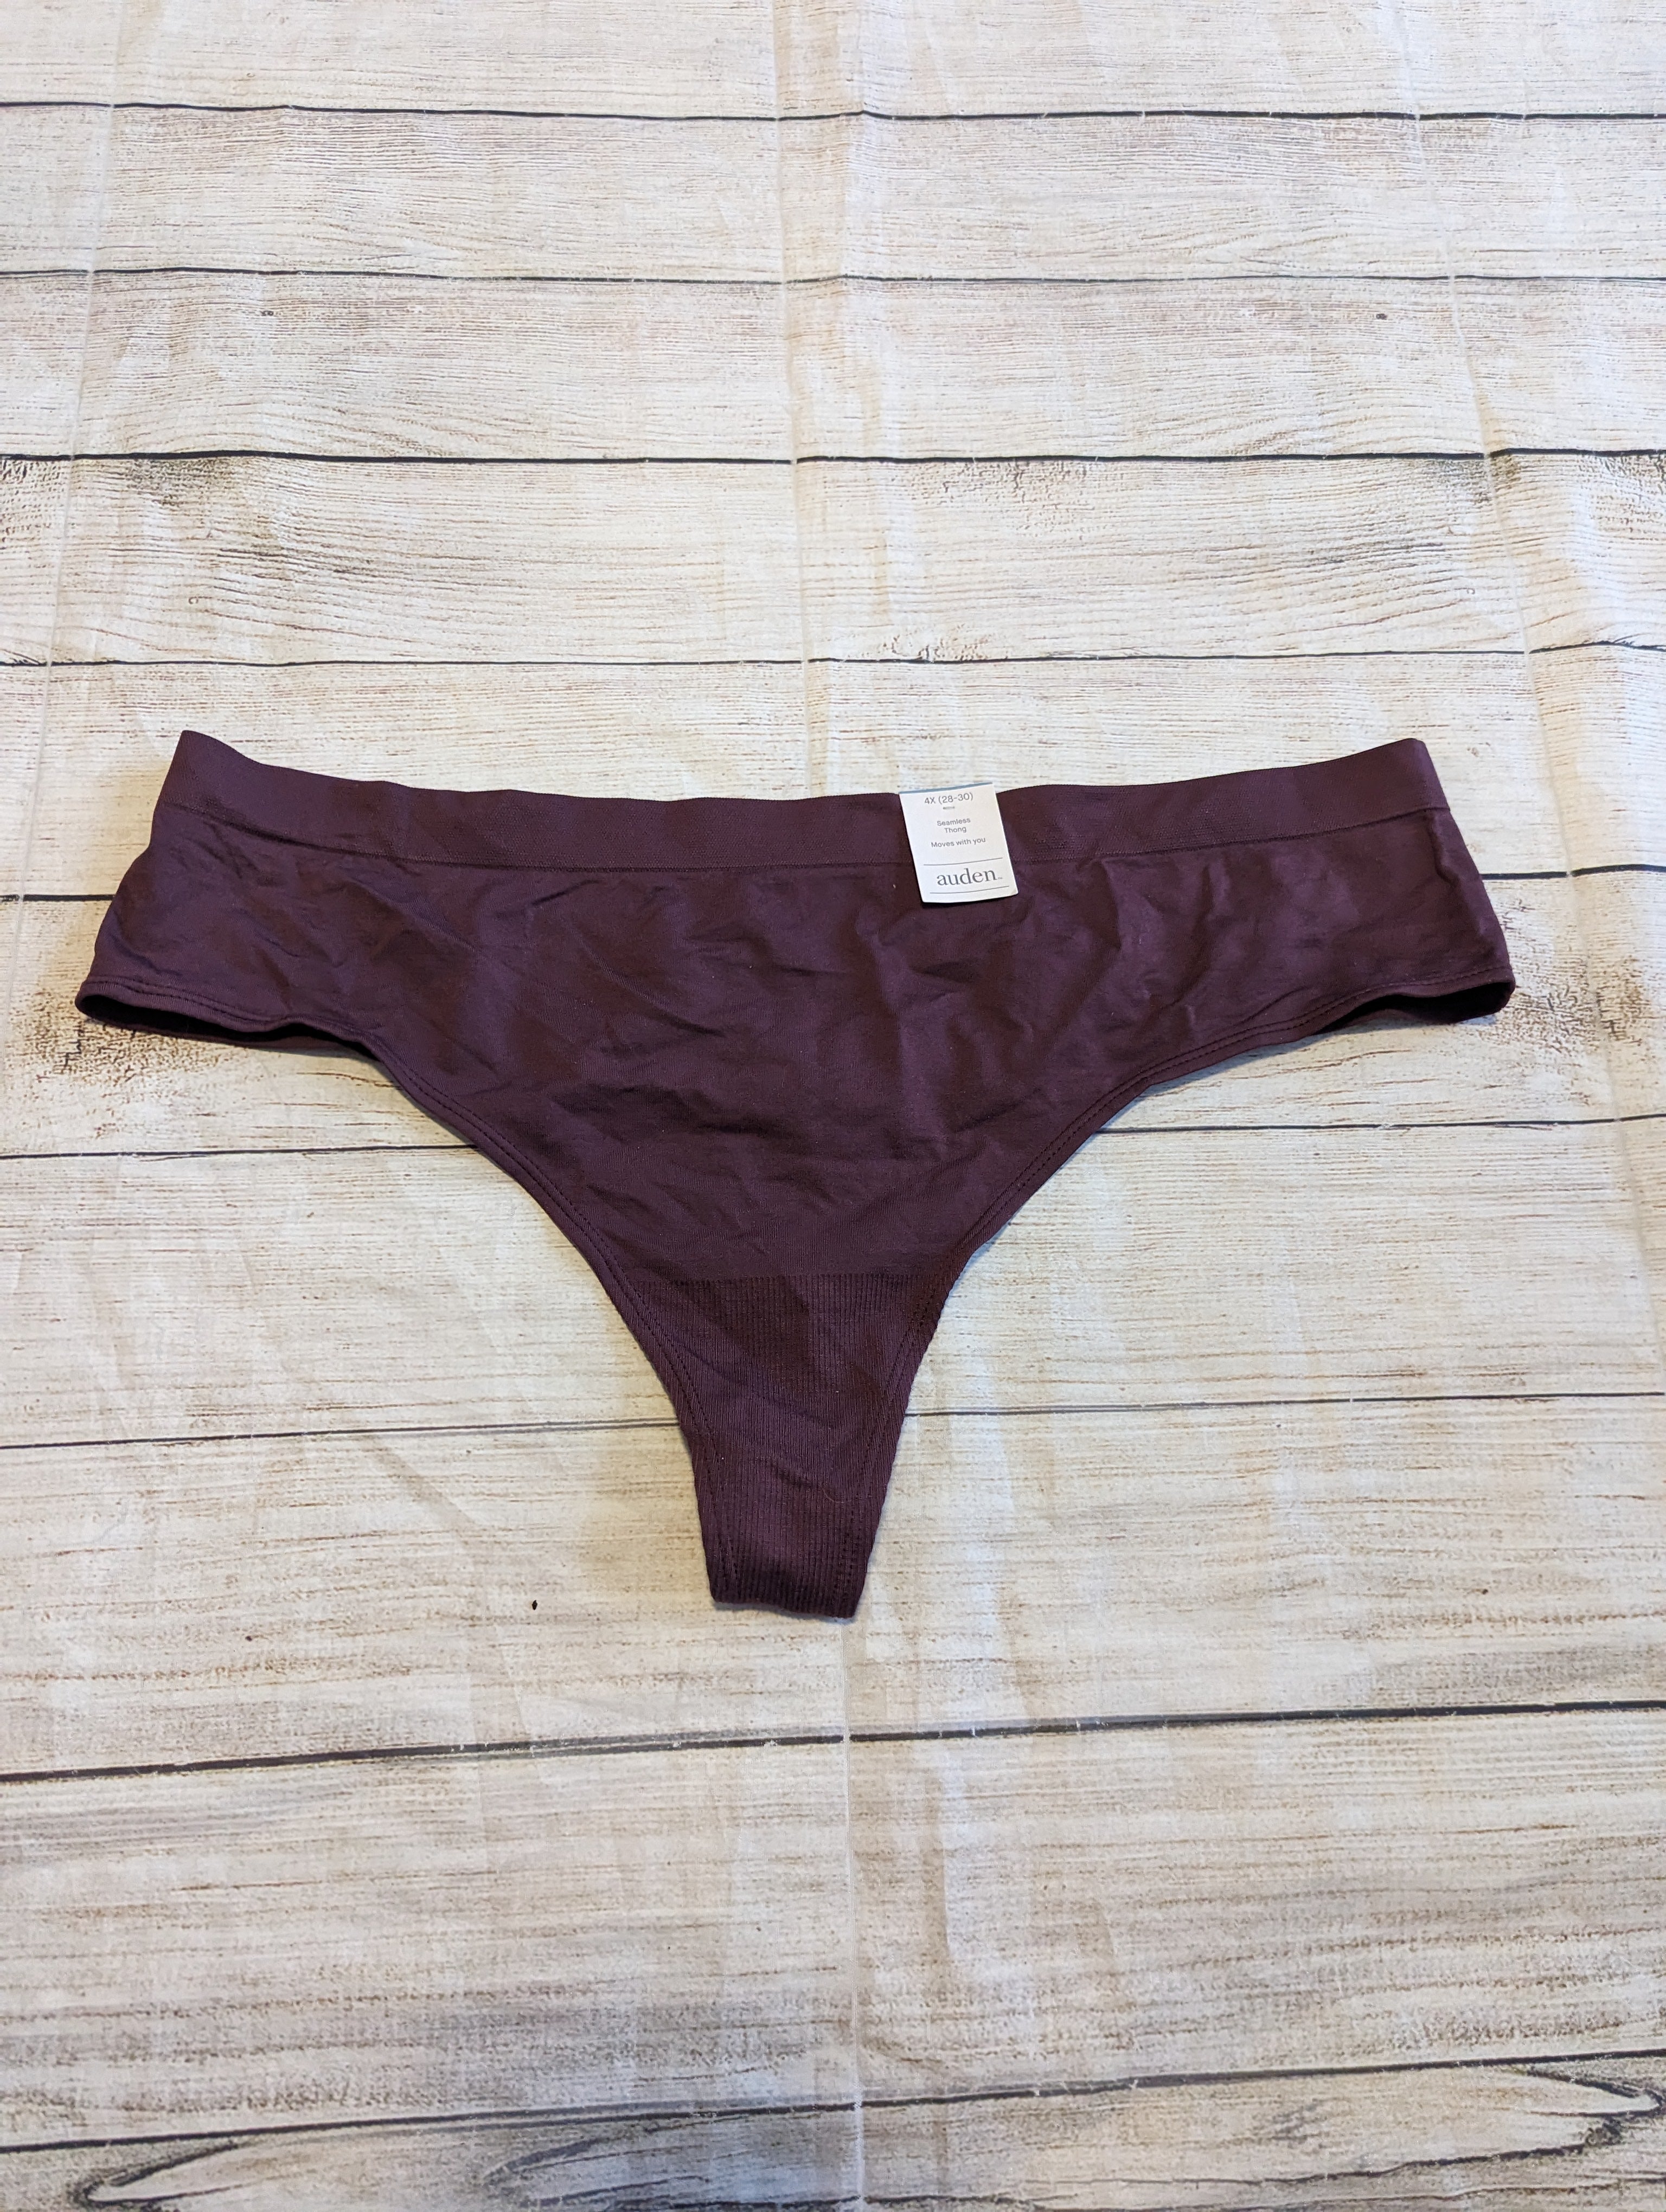 Auden Green Invisible Edge Thong Underwear Women’s Size Small New